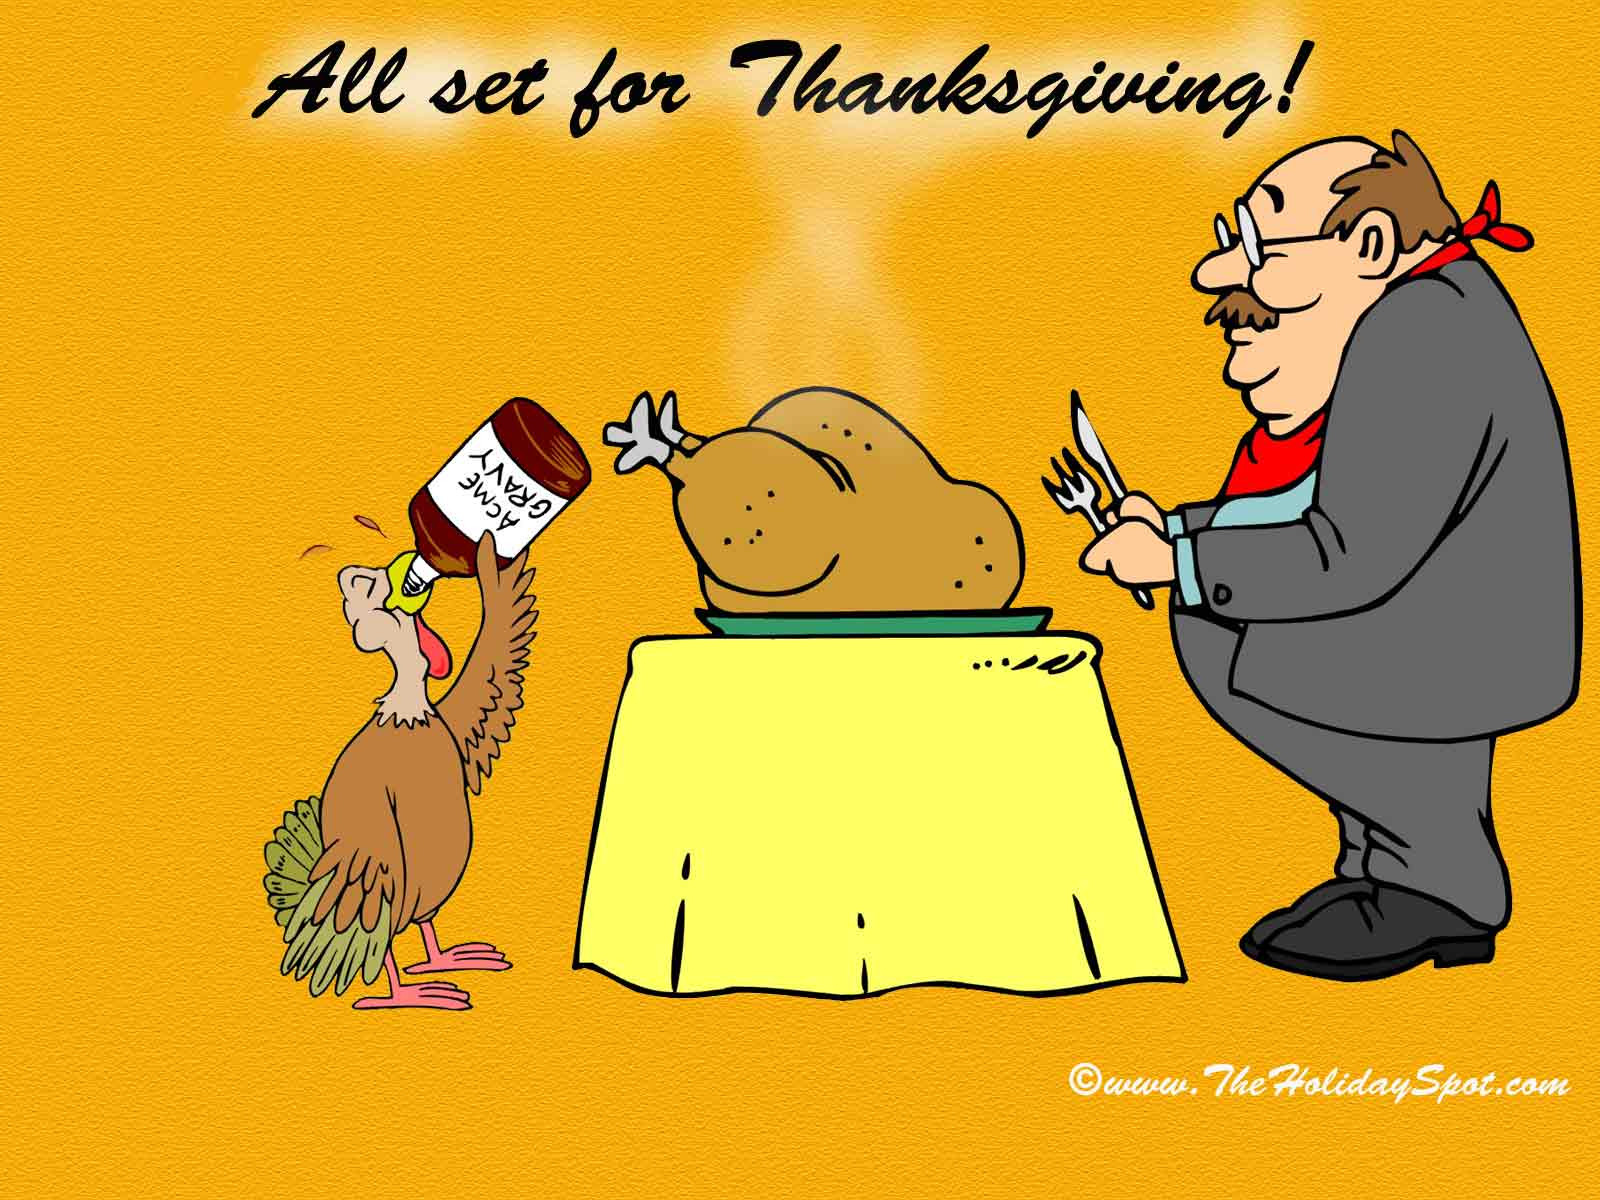 Humorous Thanksgiving Quotes
 New Wallpaper 2012 Thanksgiving Wallpaper Happy